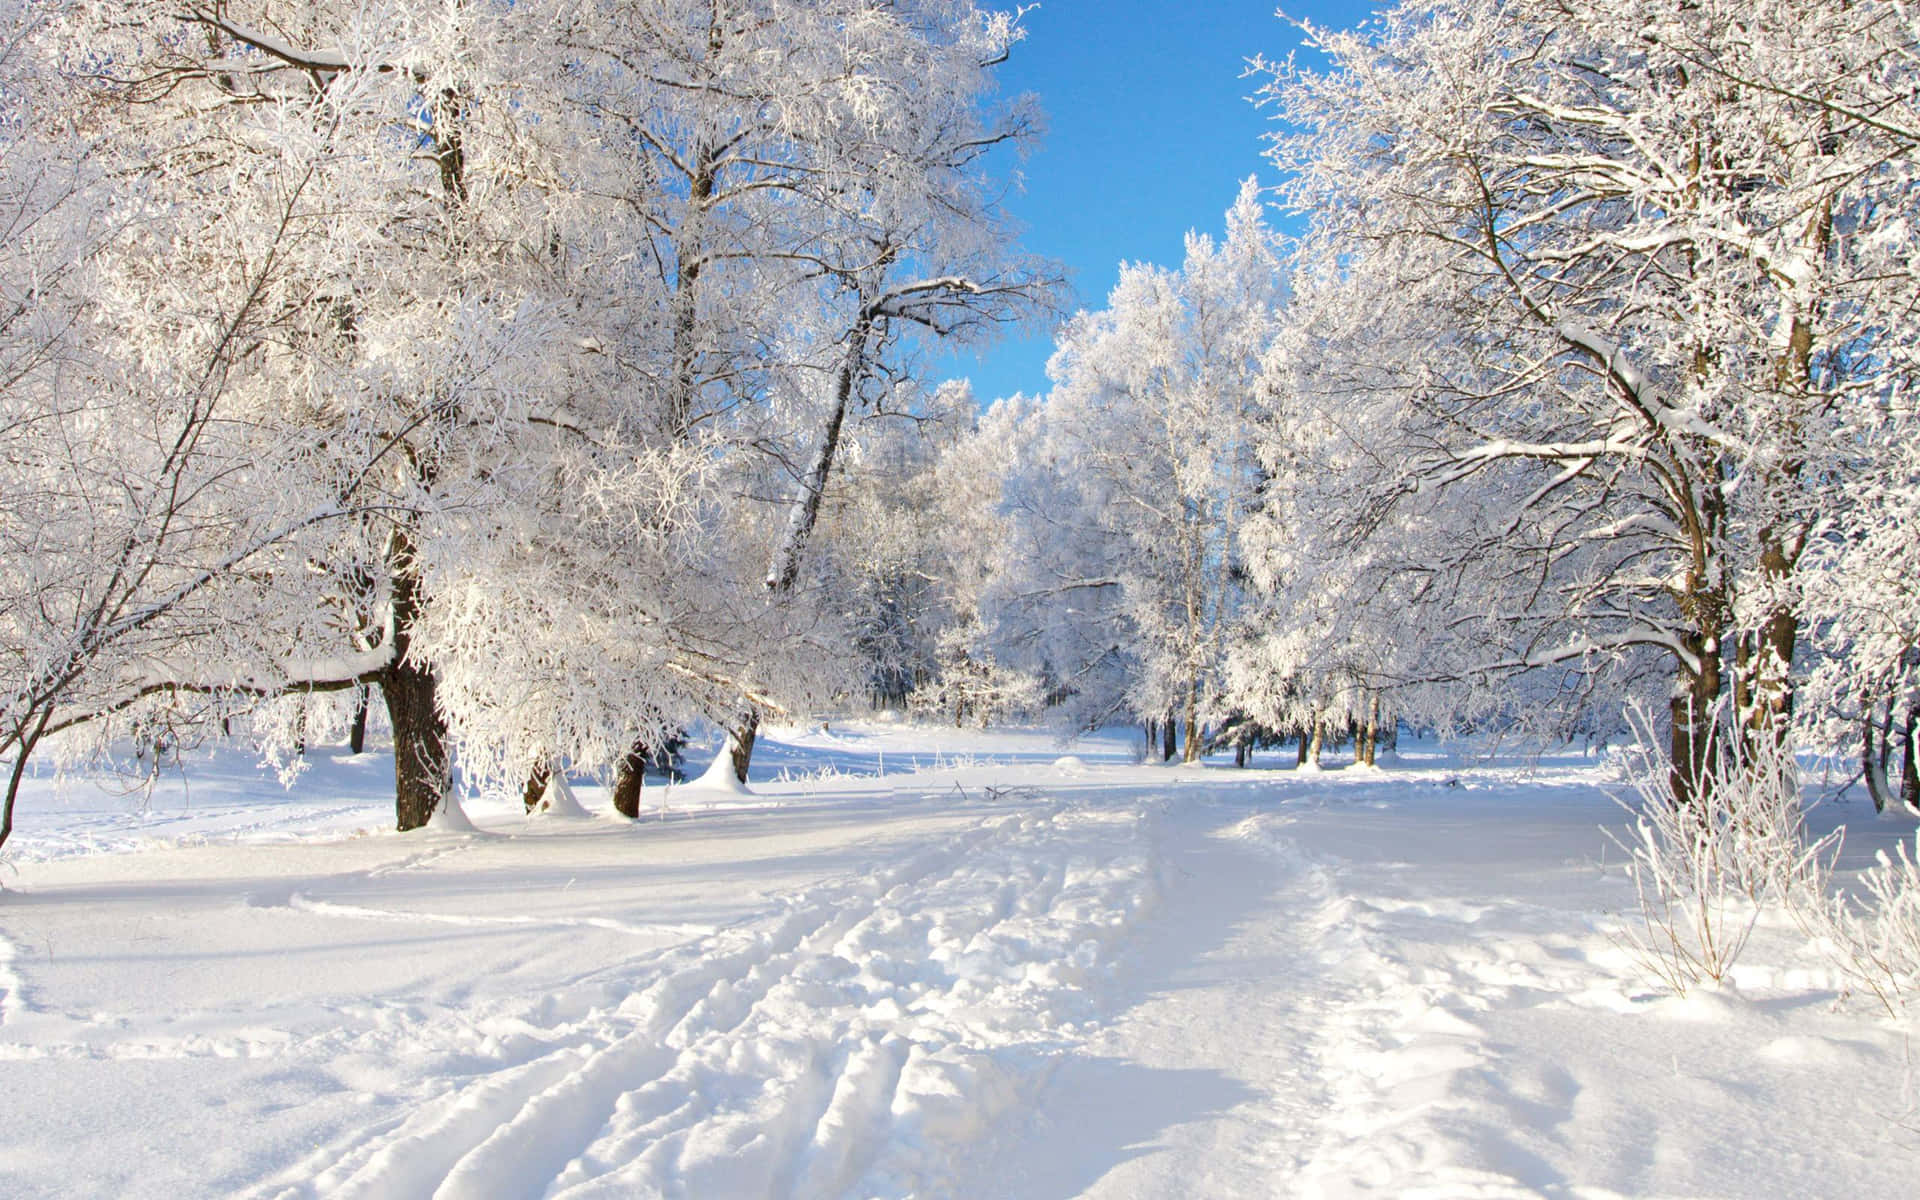 A picturesque view of a Snowy landscape